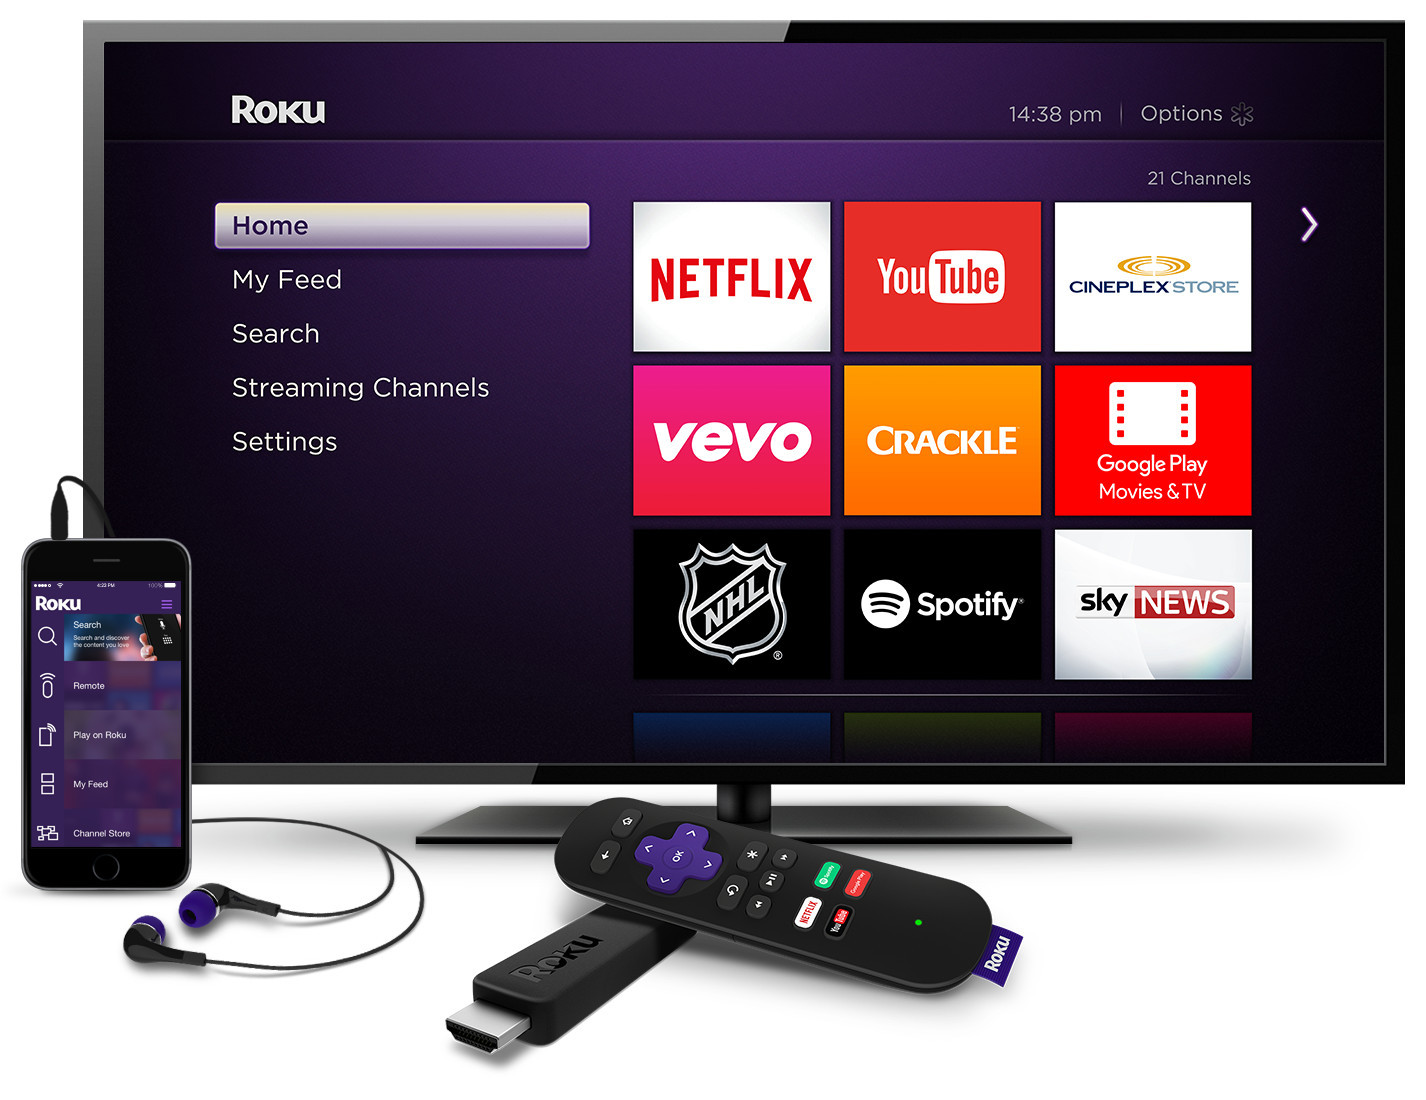 New Roku Streaming Stick Combines More Power and Portability in Sleek New Form Factor Business Wire